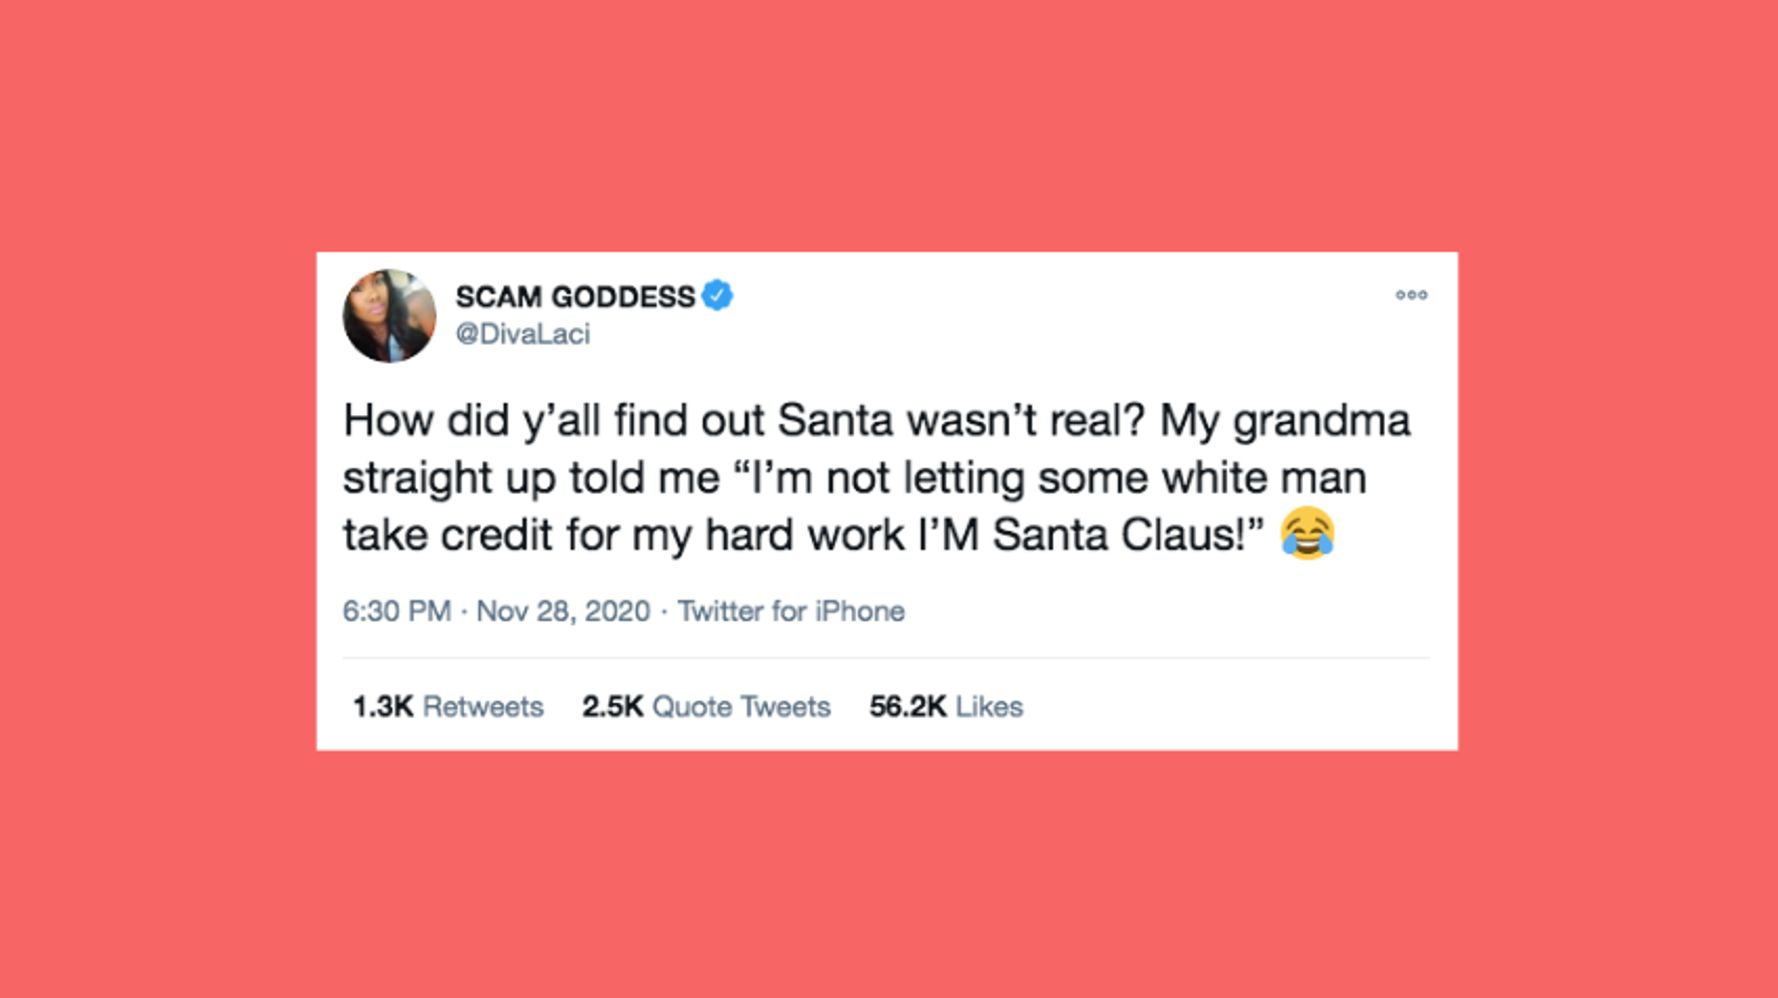 Il 20 Funniest Tweets From Women This Week (novembre. 28-dicembre. 4)